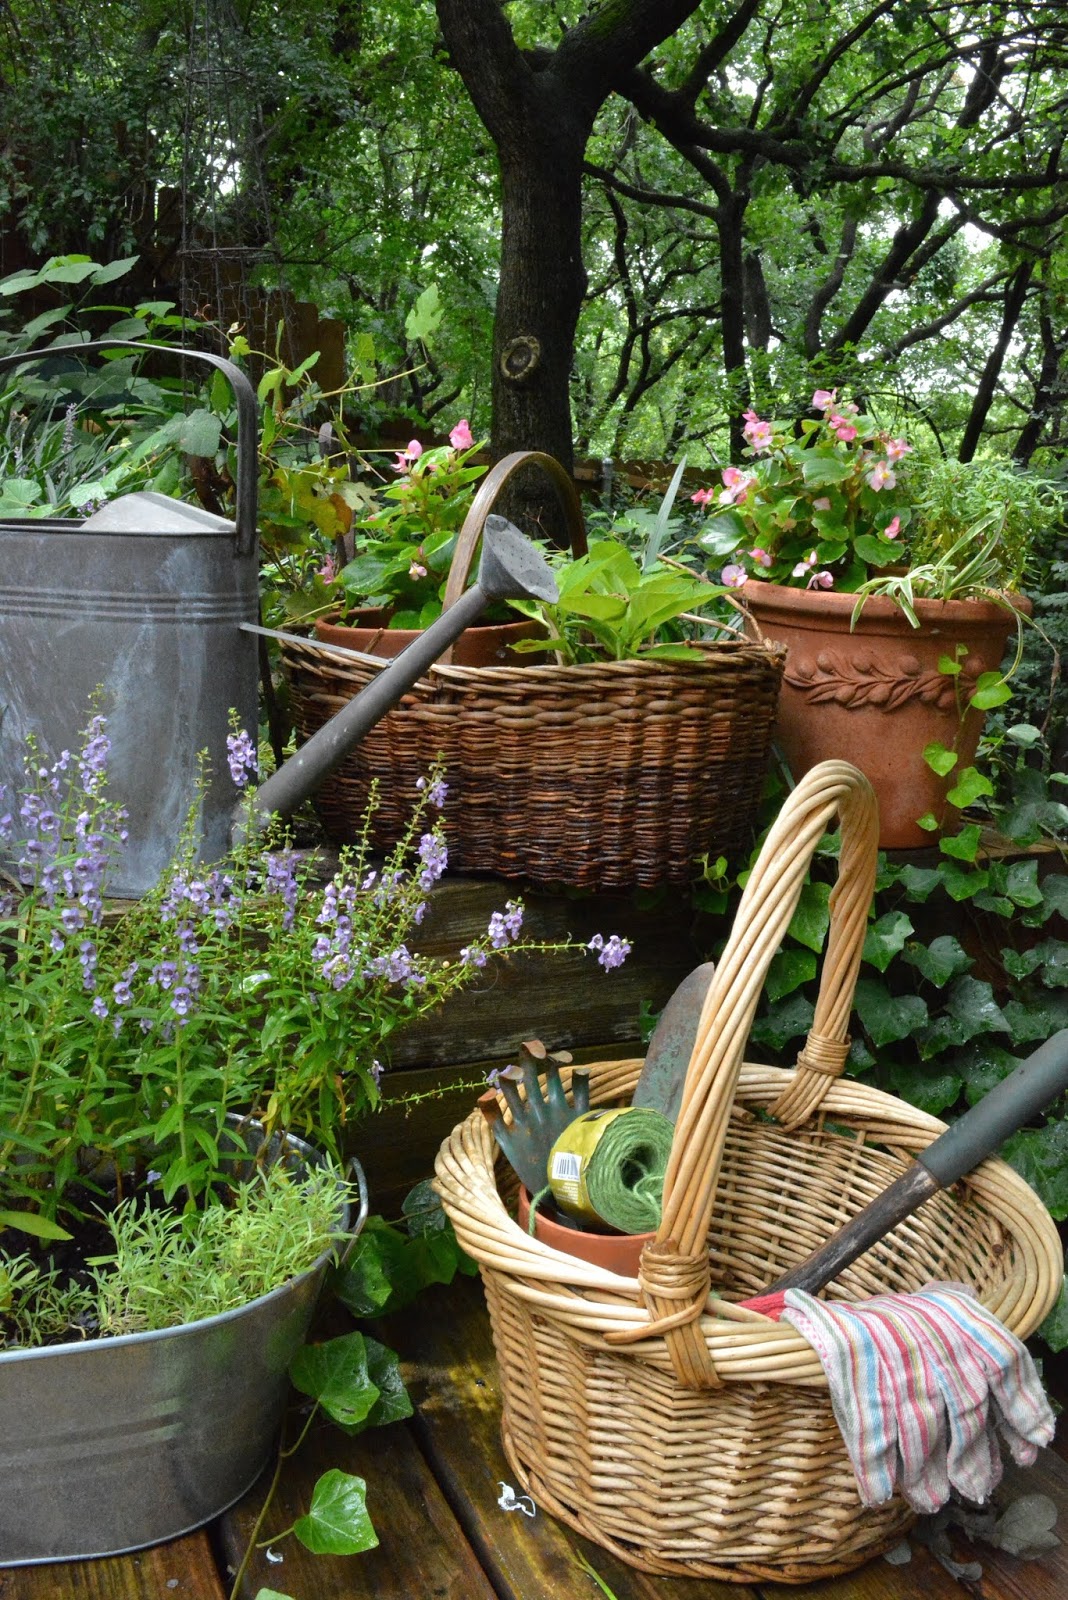 Let's Add Sprinkles: Baskets In The Garden/Lifestyle Of Love Blog Hop